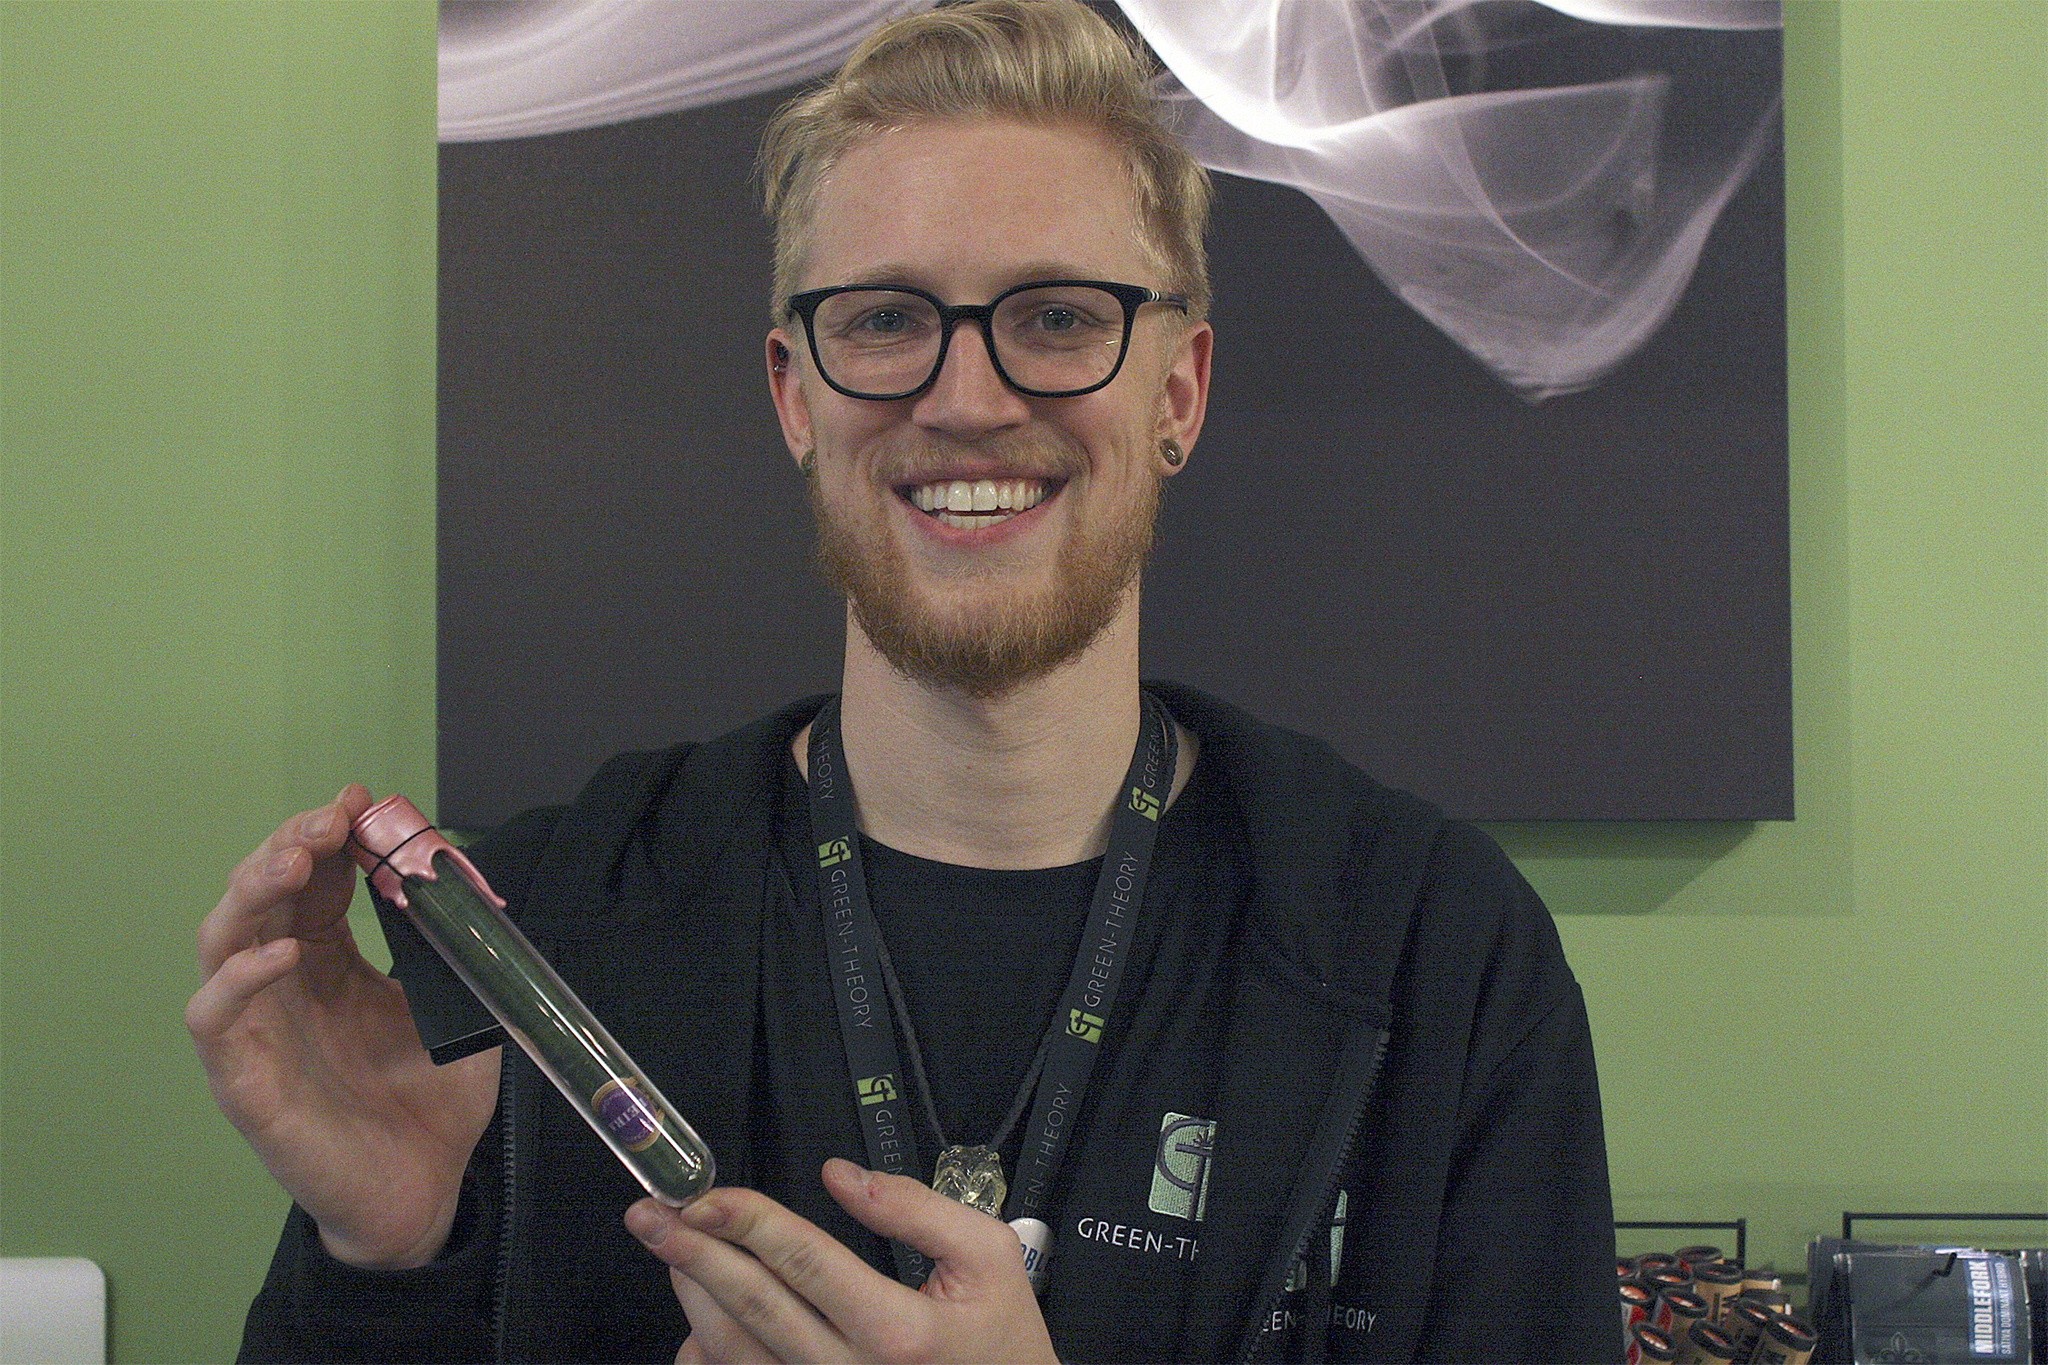 Green-Theory Evan Anderson displays the "Cannagar" to be auctioned off at the fundraising event on Saturday